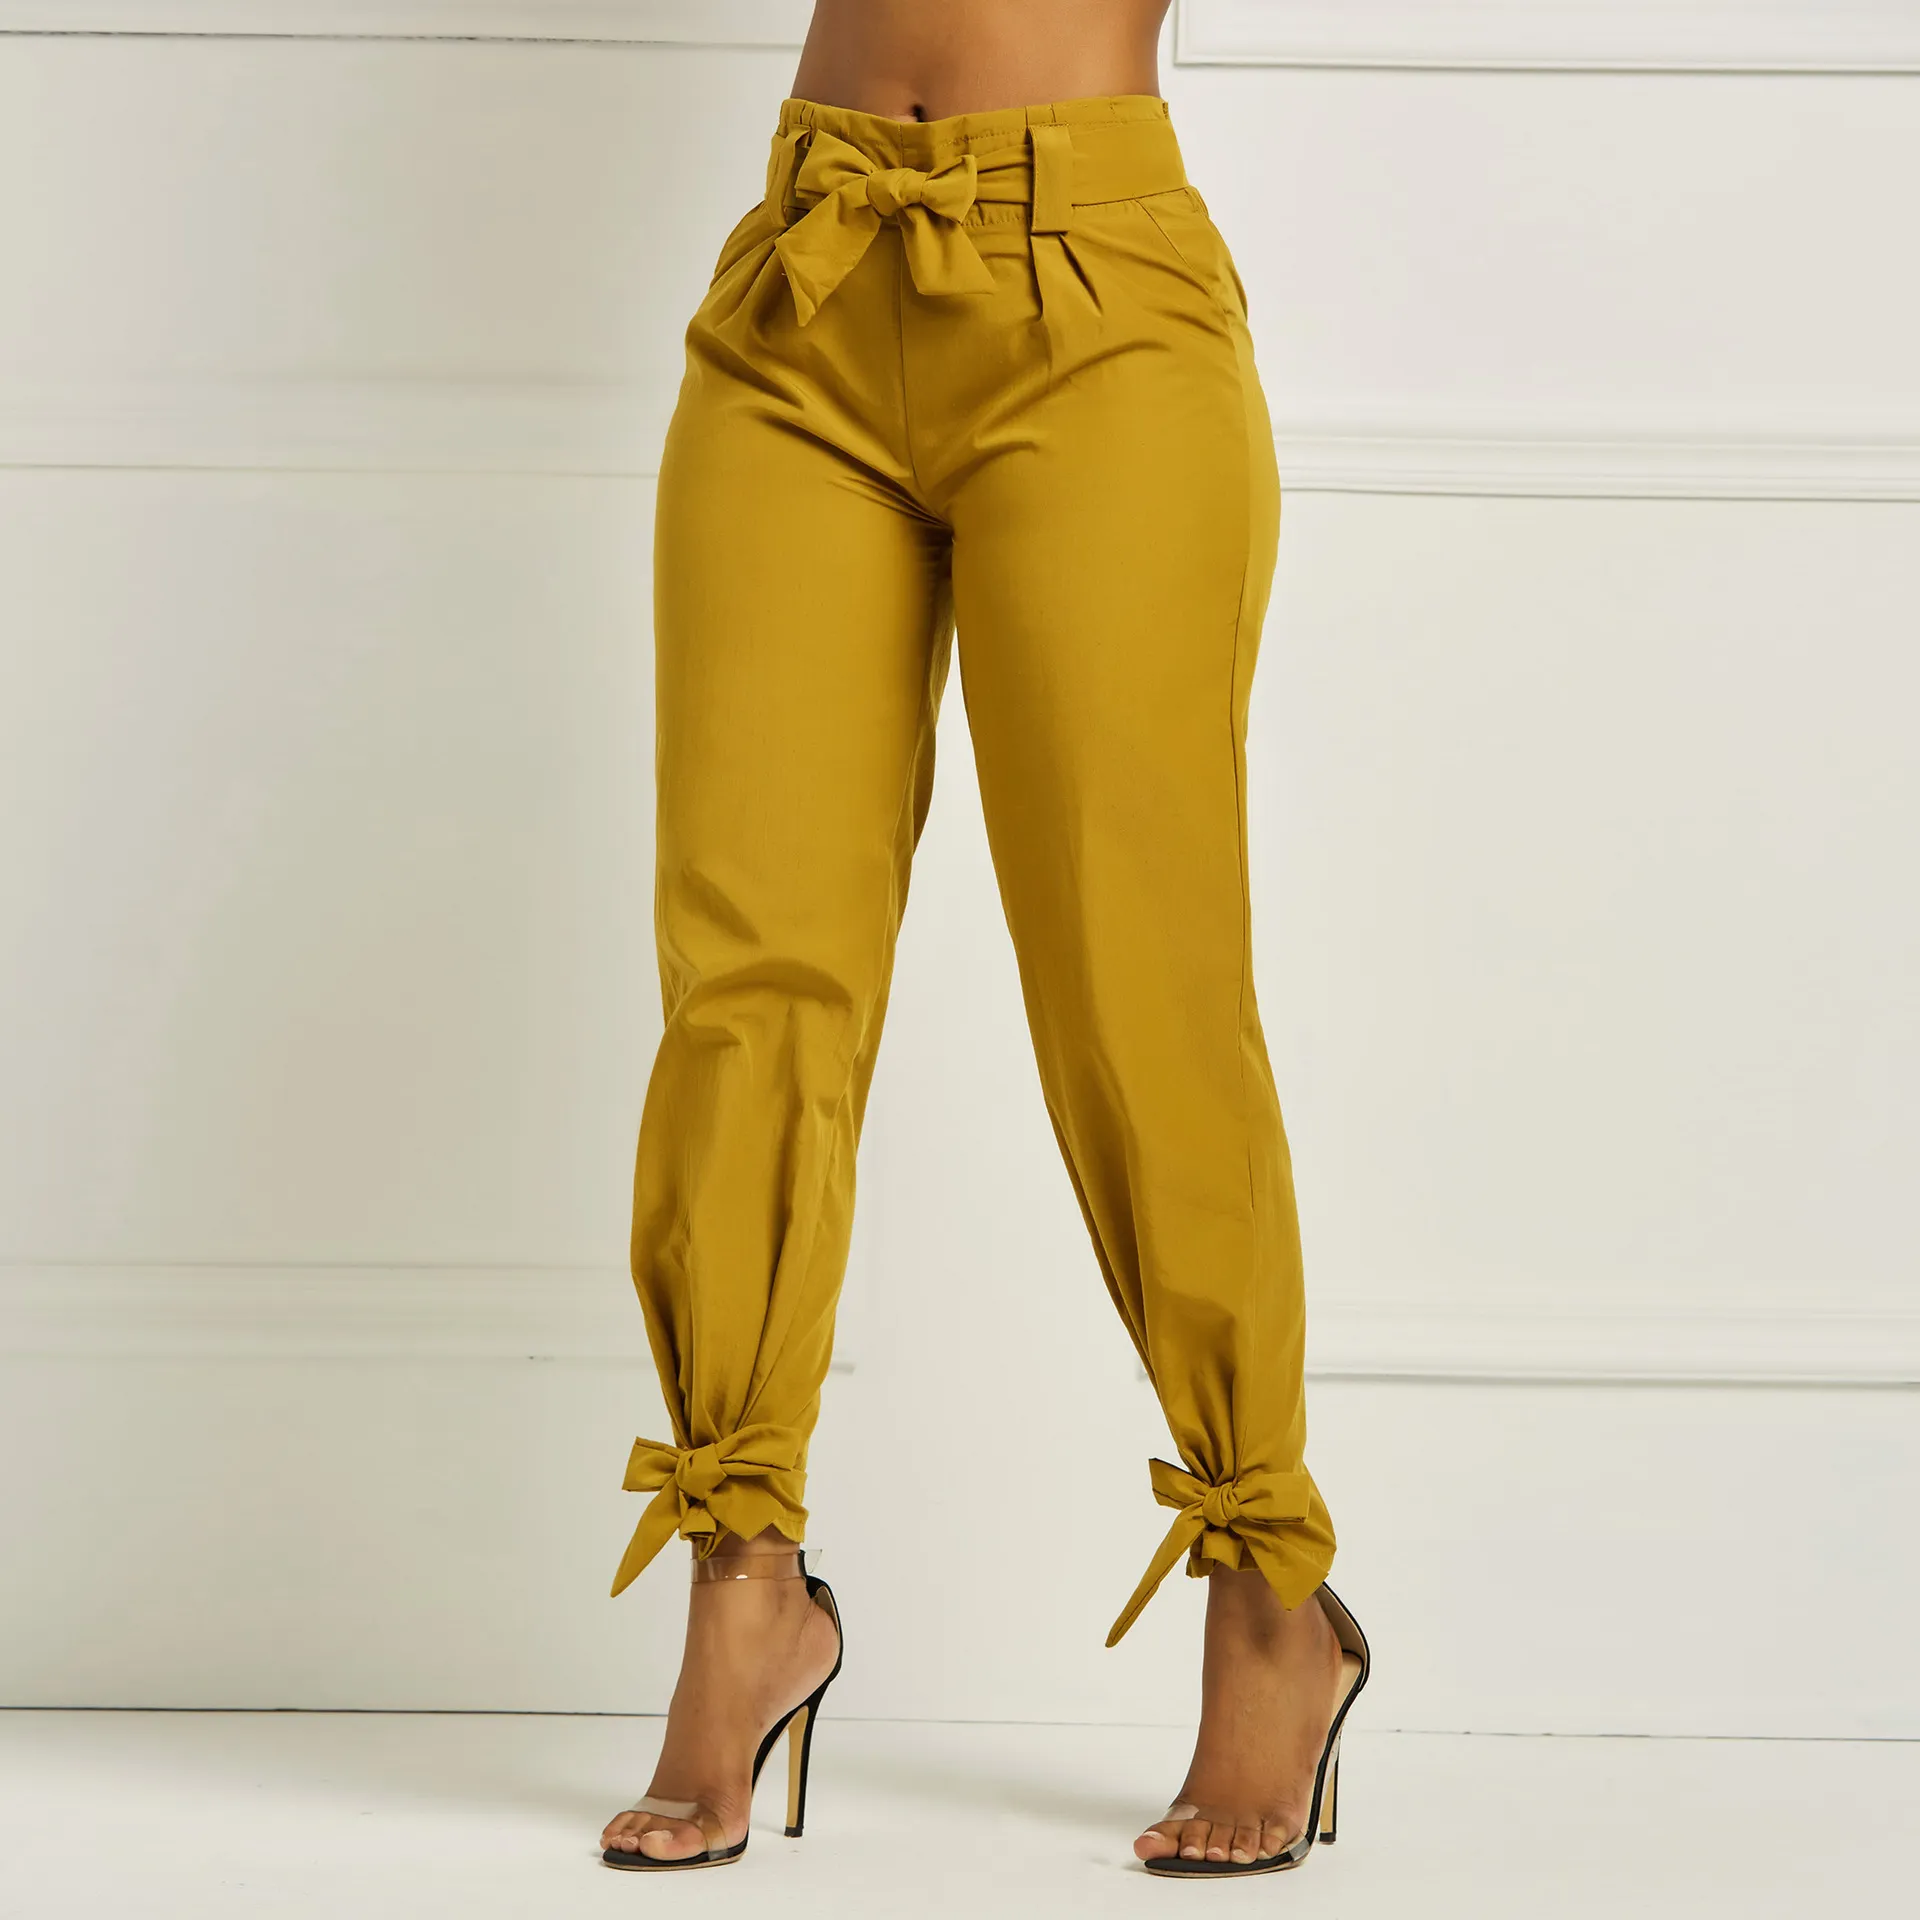 Kvinnor Summer Harem Pants With Midje Belt Bowtie Solid Trousers Ladies Casual Fashion Middle Midje Girls Street Clothing 201113